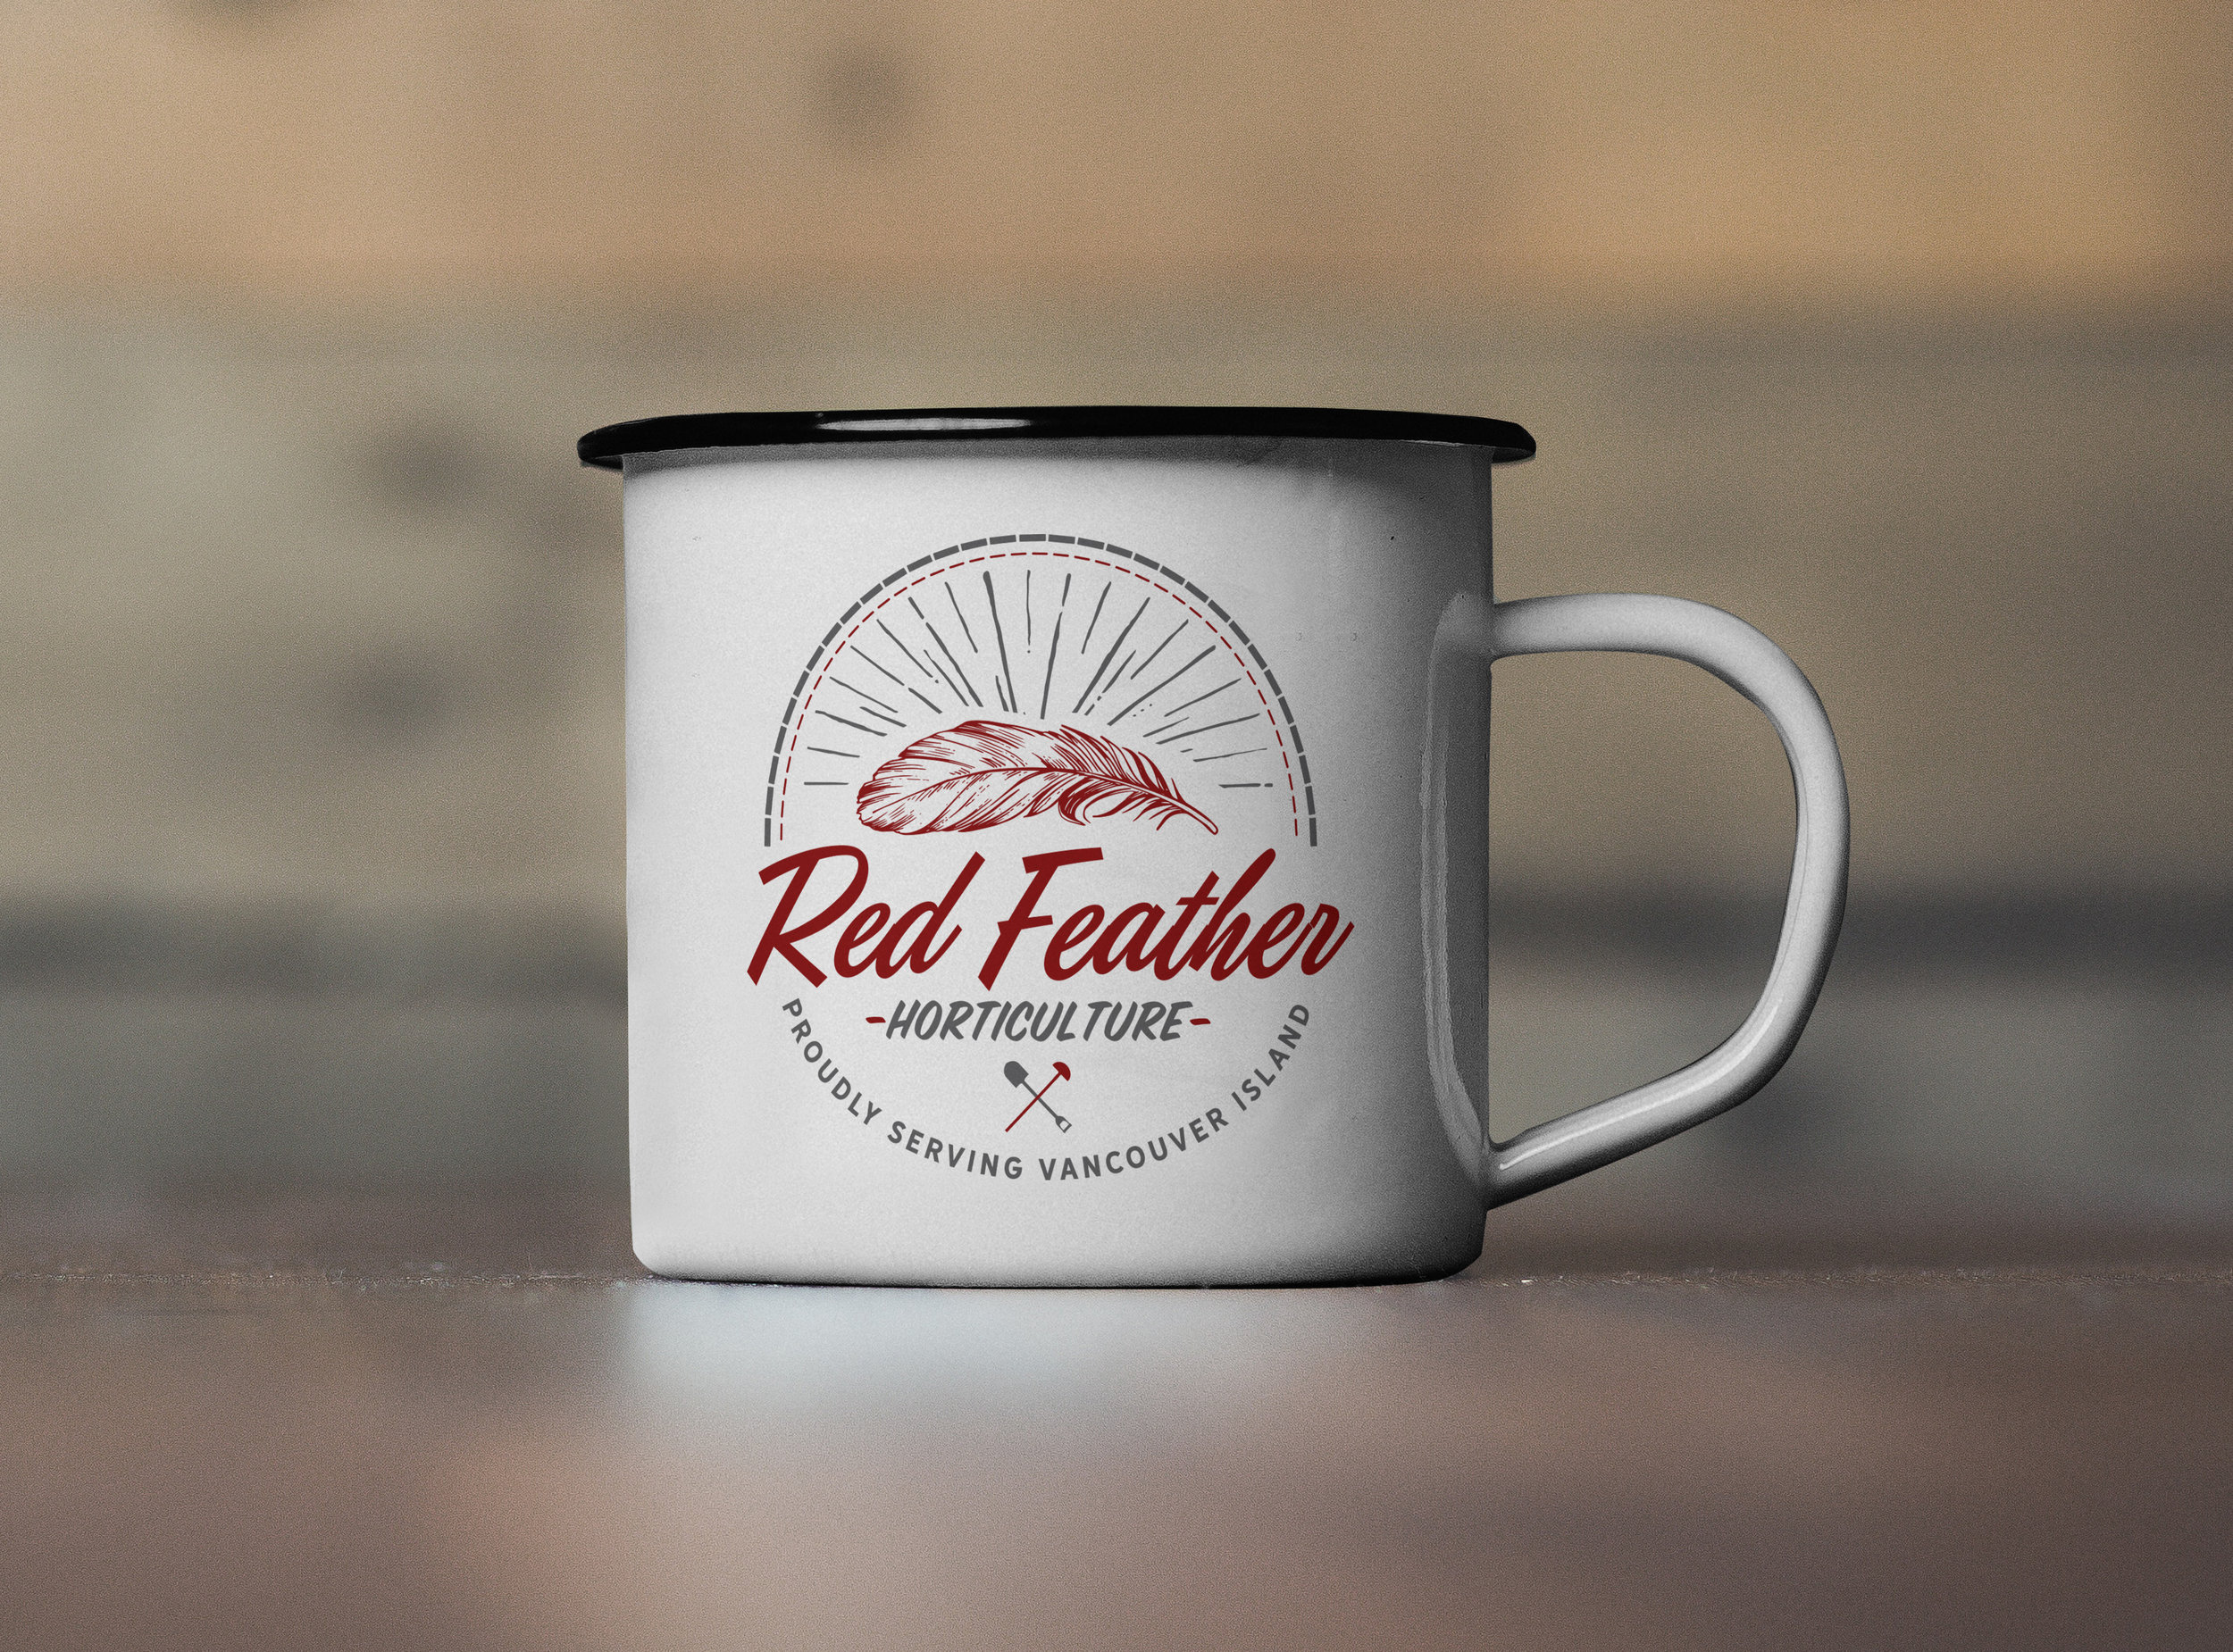 Logo Design: Red Feather Horticulture, Vancuver Island